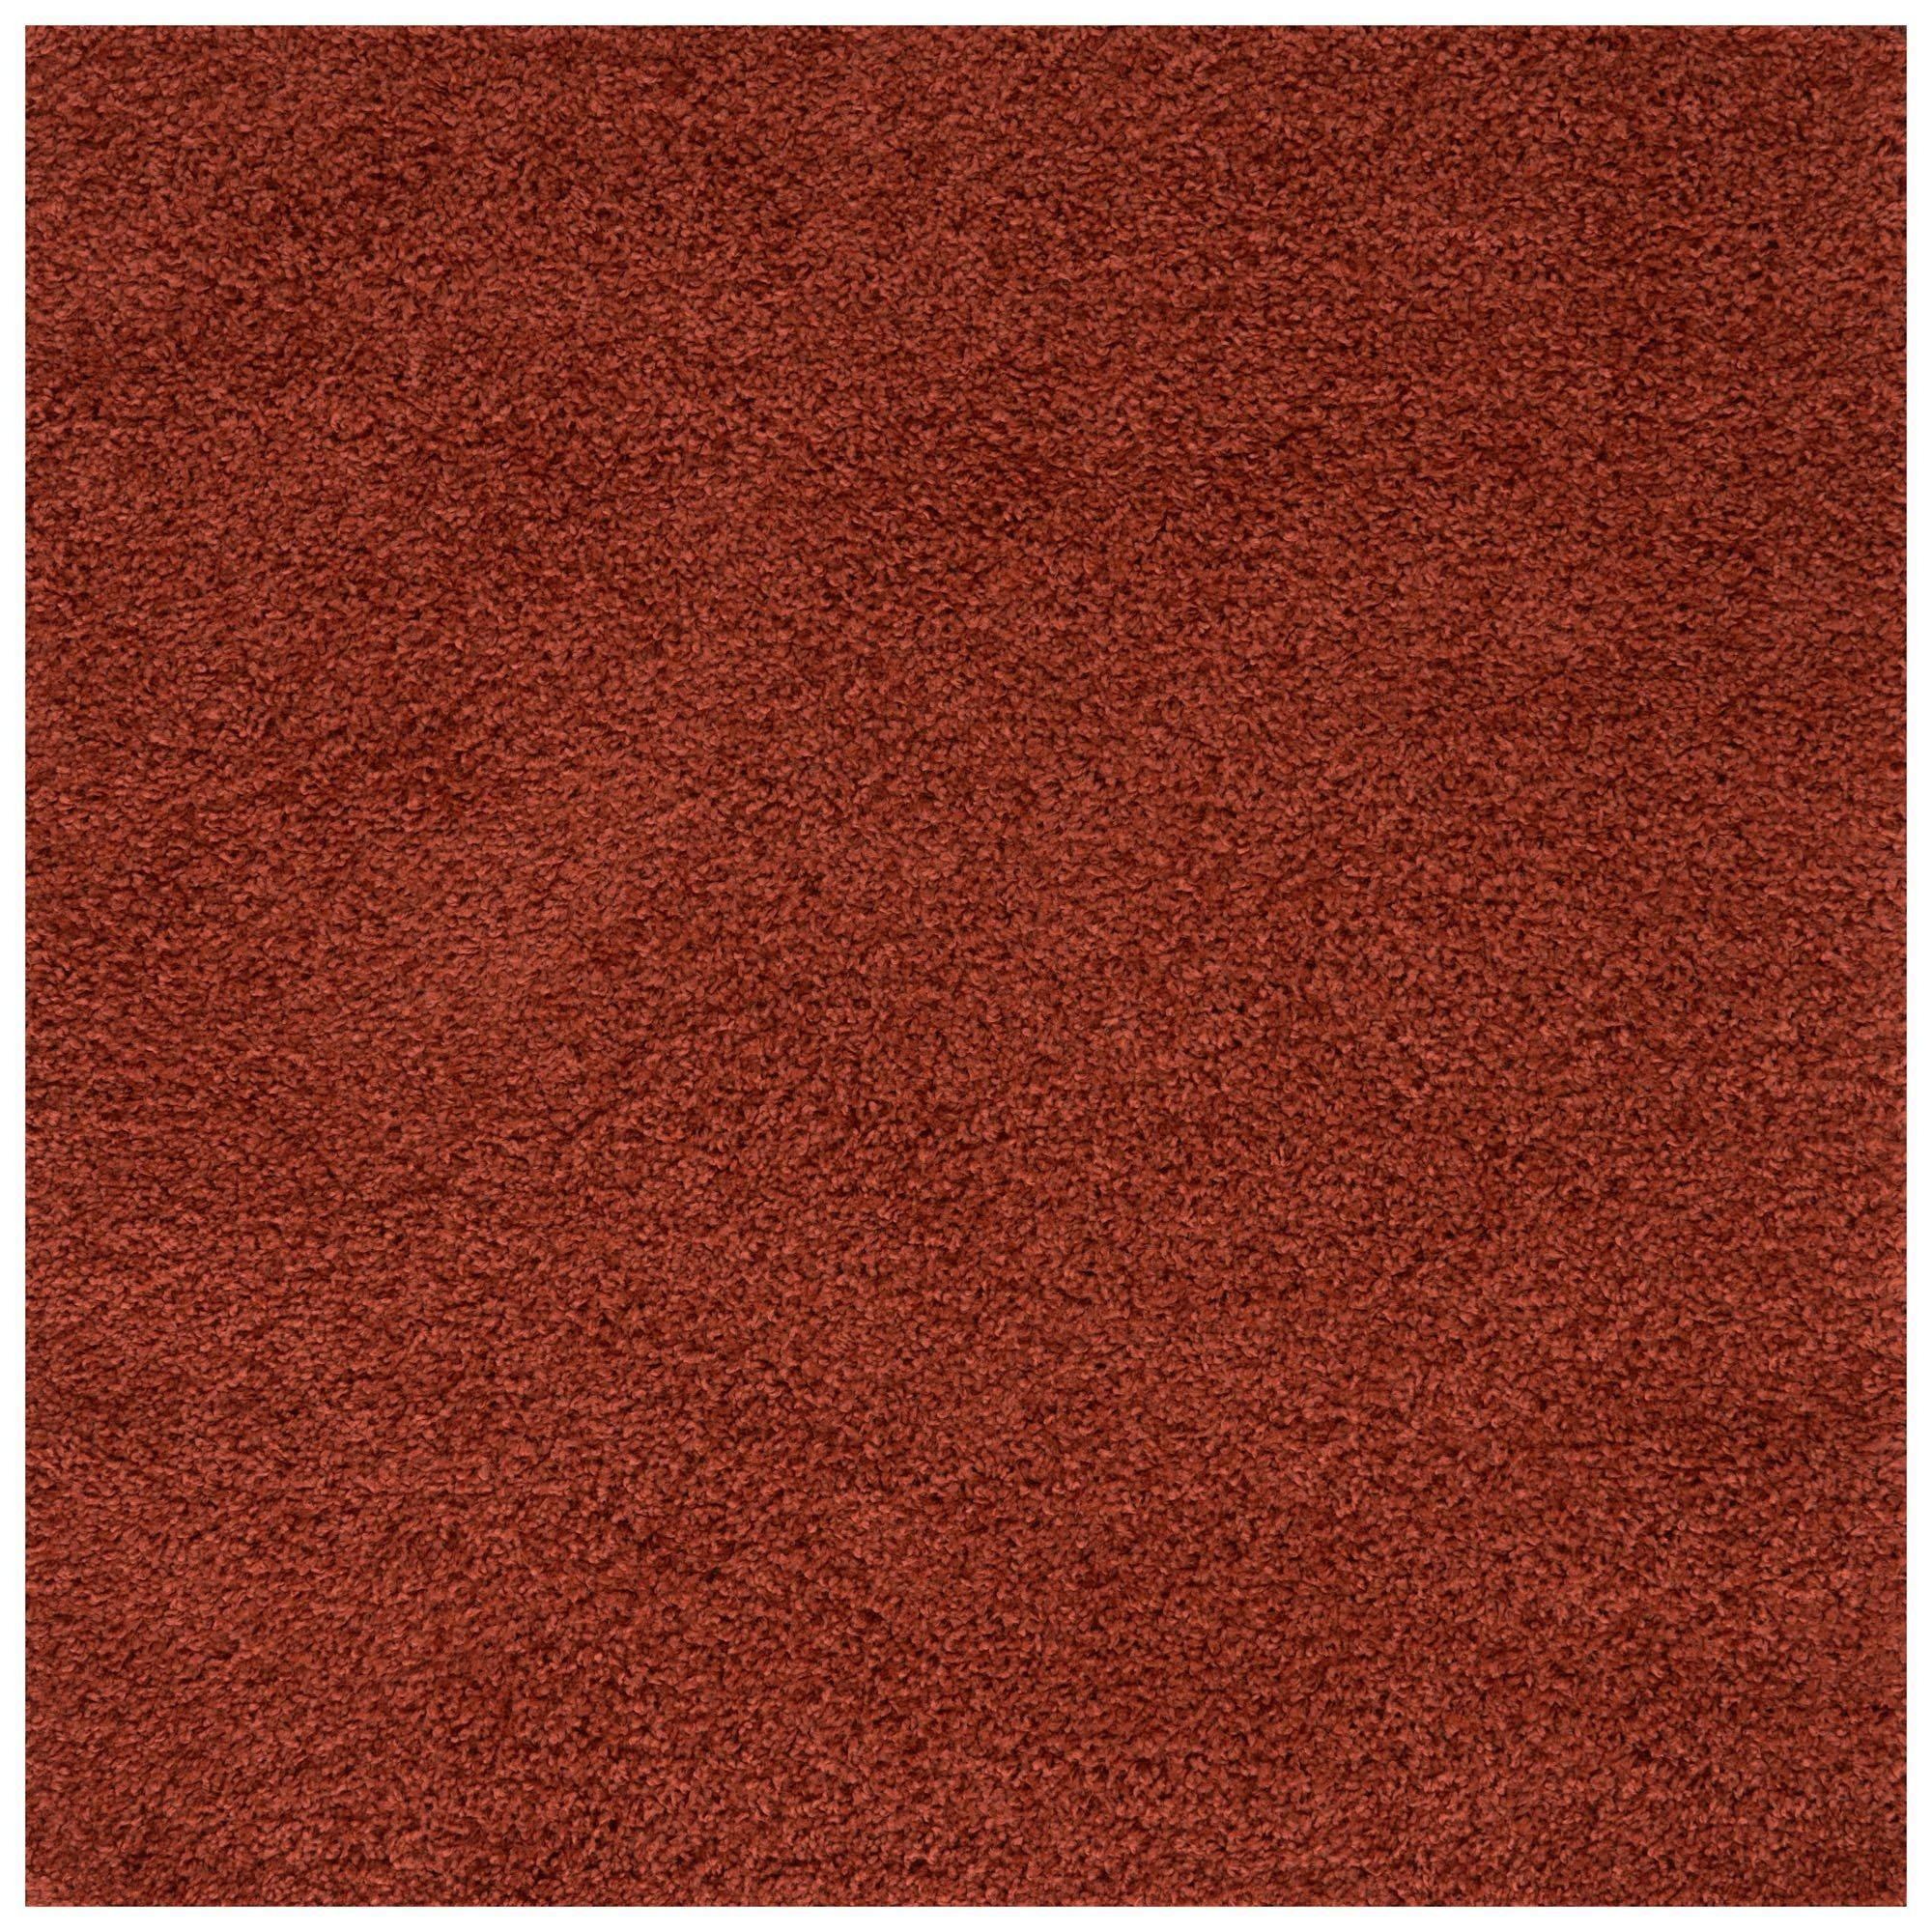 Myshaggy Collection Rugs Solid Design in Terracotta - image 1